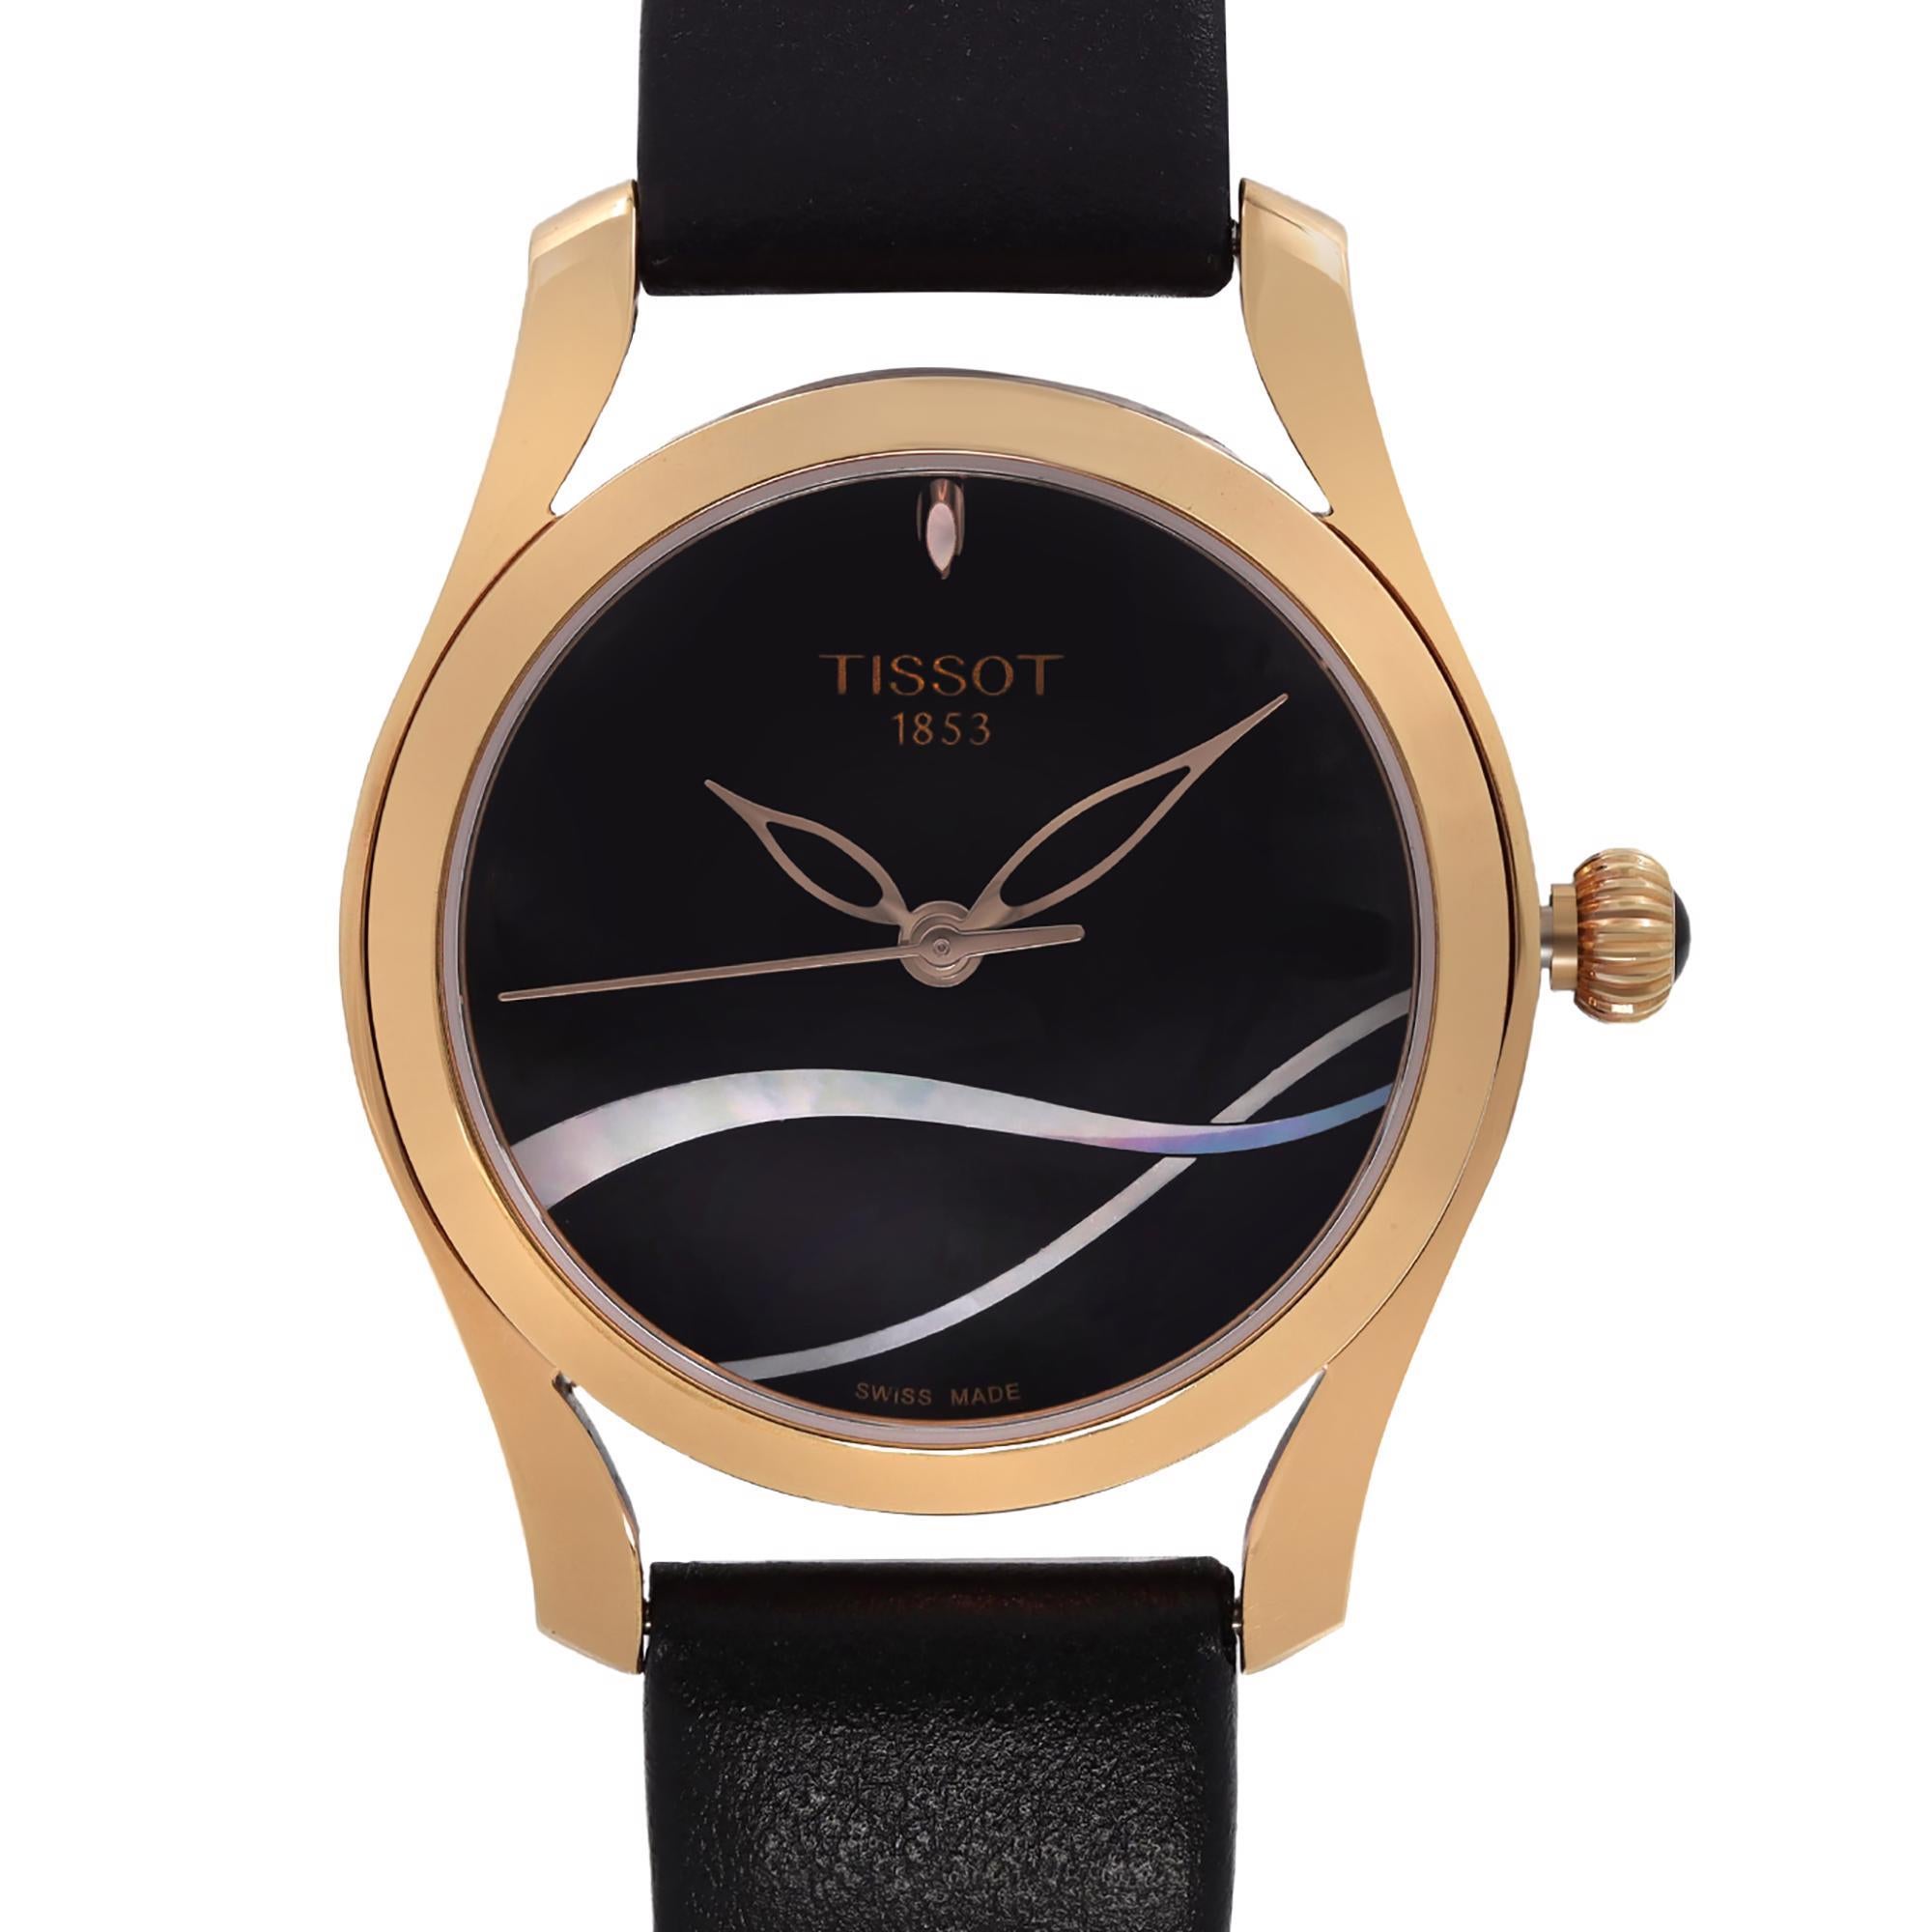 Pre-owned Mint Condition Tissot T-Wave Quartz Ladies Watch T112.210.36.051.00. The Watch was never worn and only has Micro Scratches on the Case From Store Handling. This Beautiful Timepiece is Powered by an Quartz (Battery) Movement and Features: